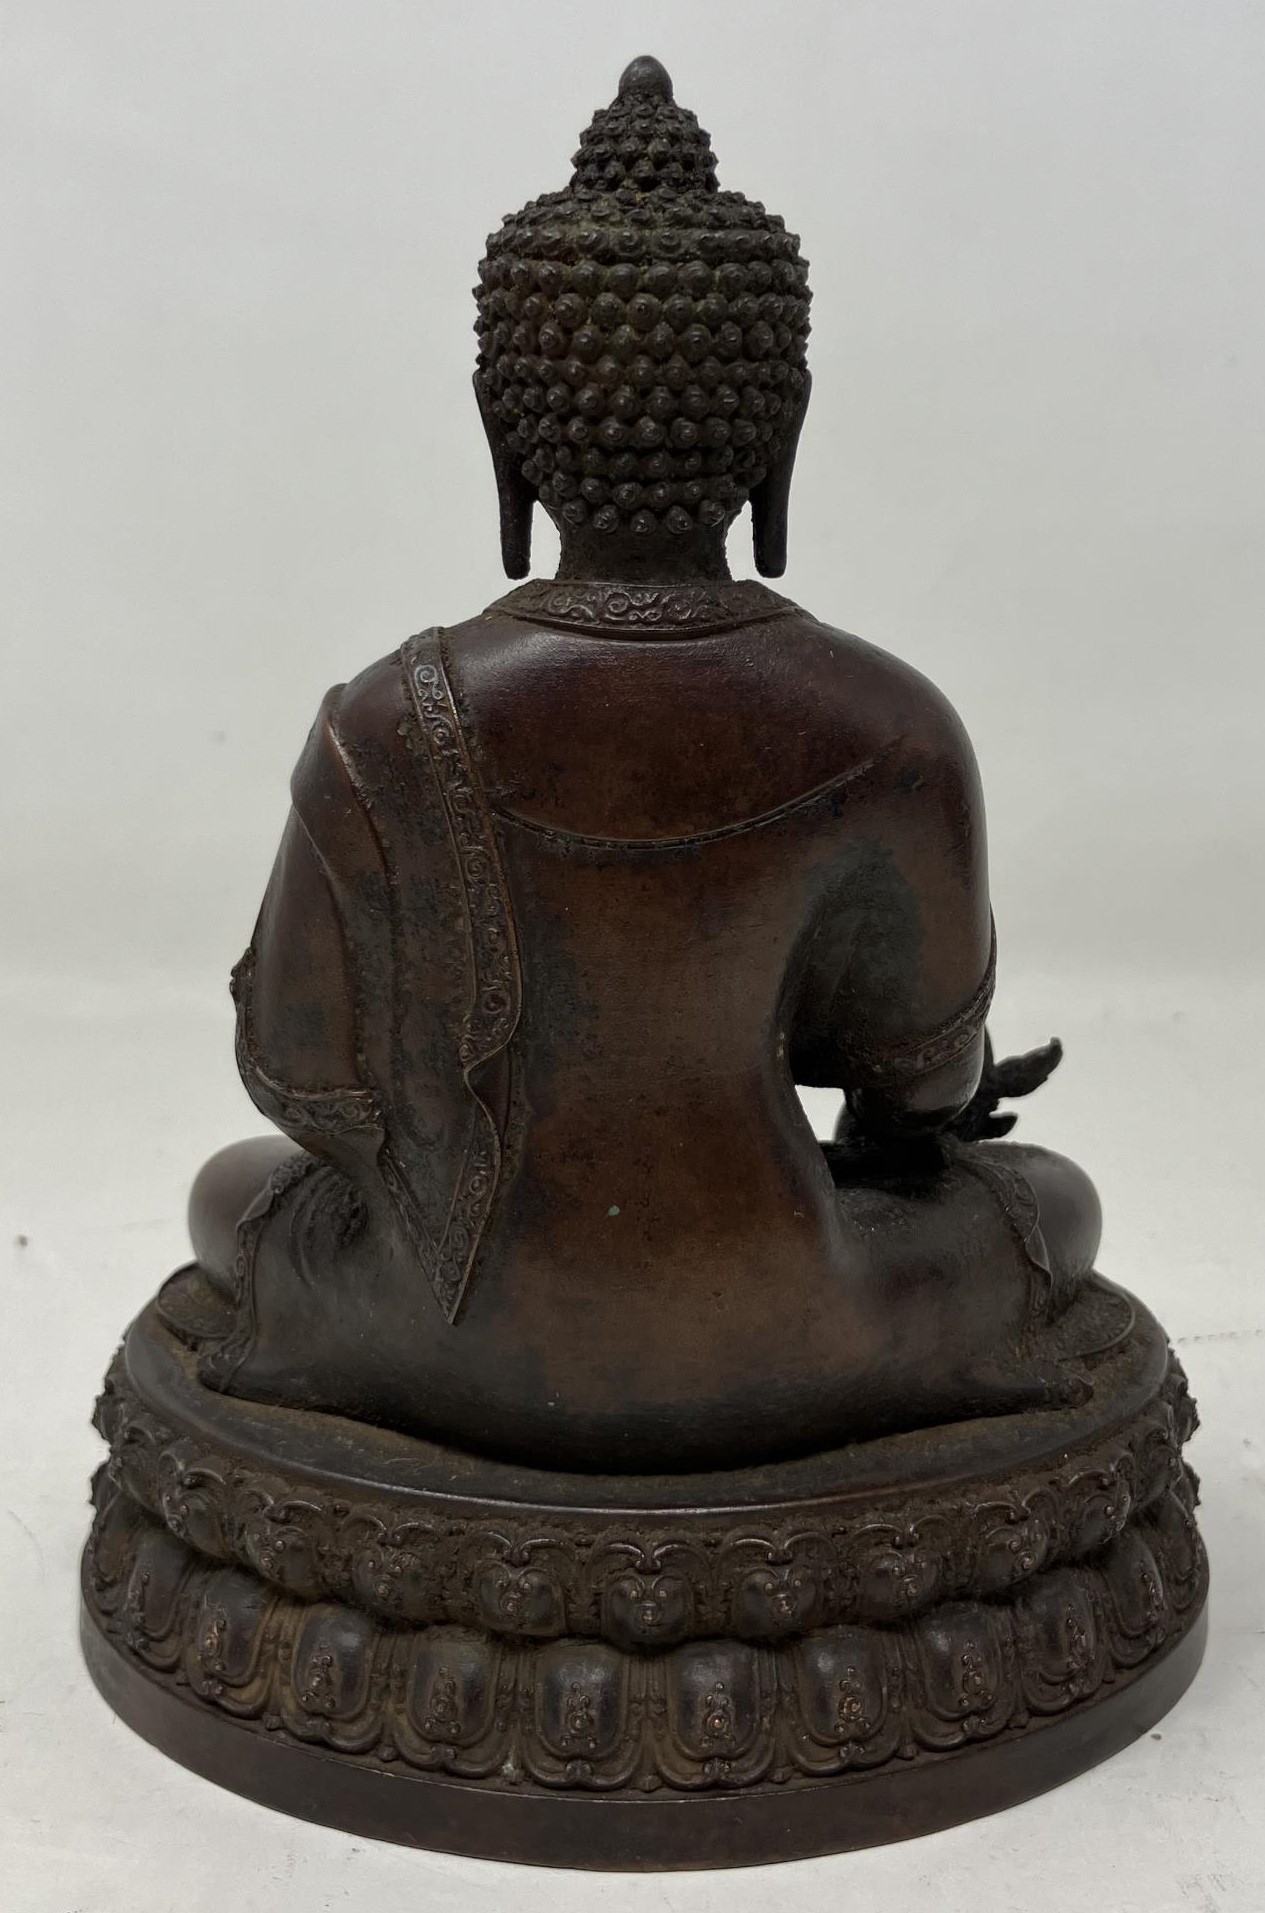 A Chinese bronze Buddha, 15 cm high good condition, no faults found - Image 2 of 3